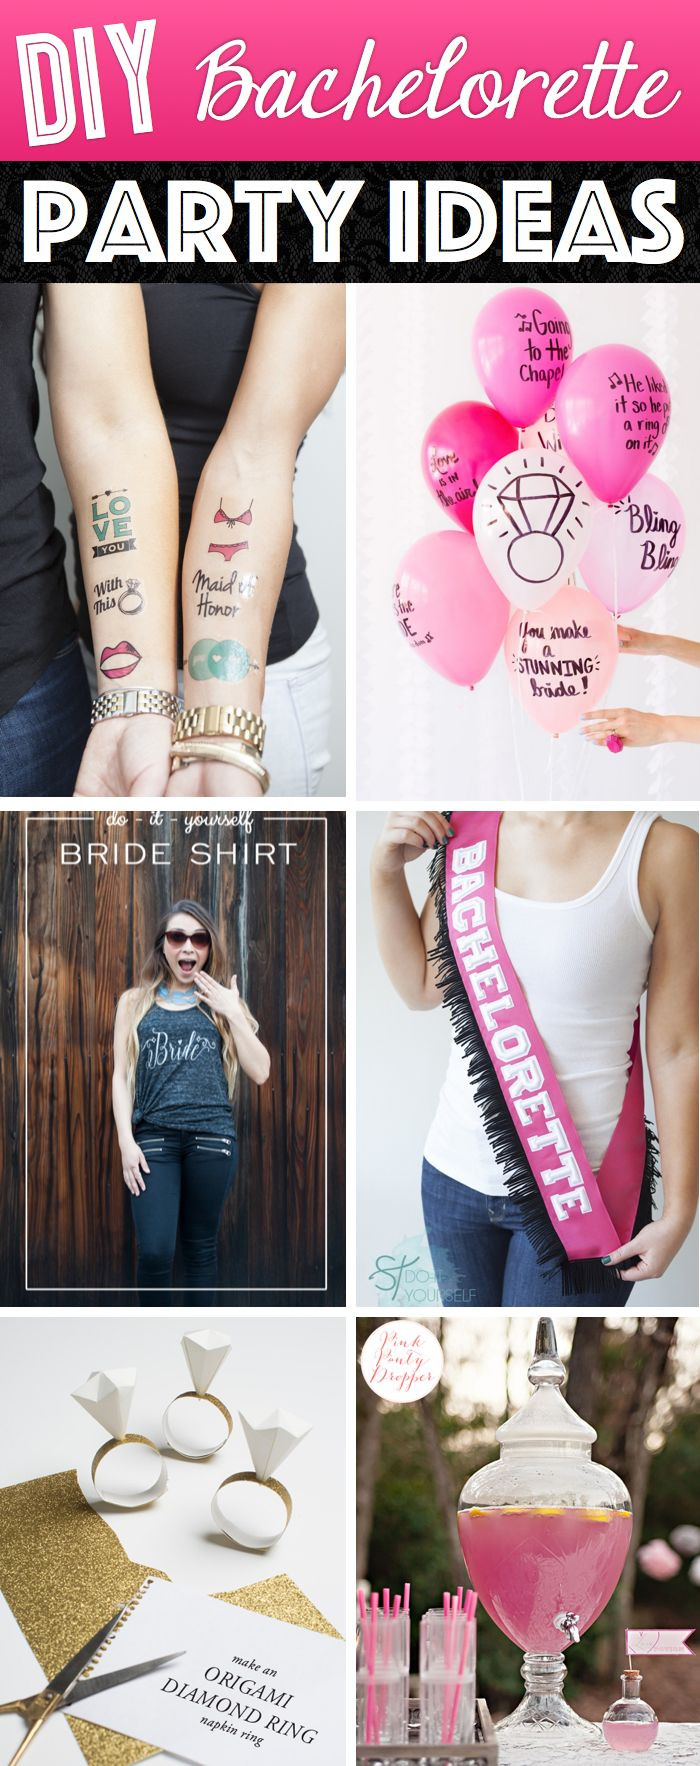 Bachelorette Party Ideas Over 30
 Your Guests Will Be Dazzled By These 30 DIY Bachelorette